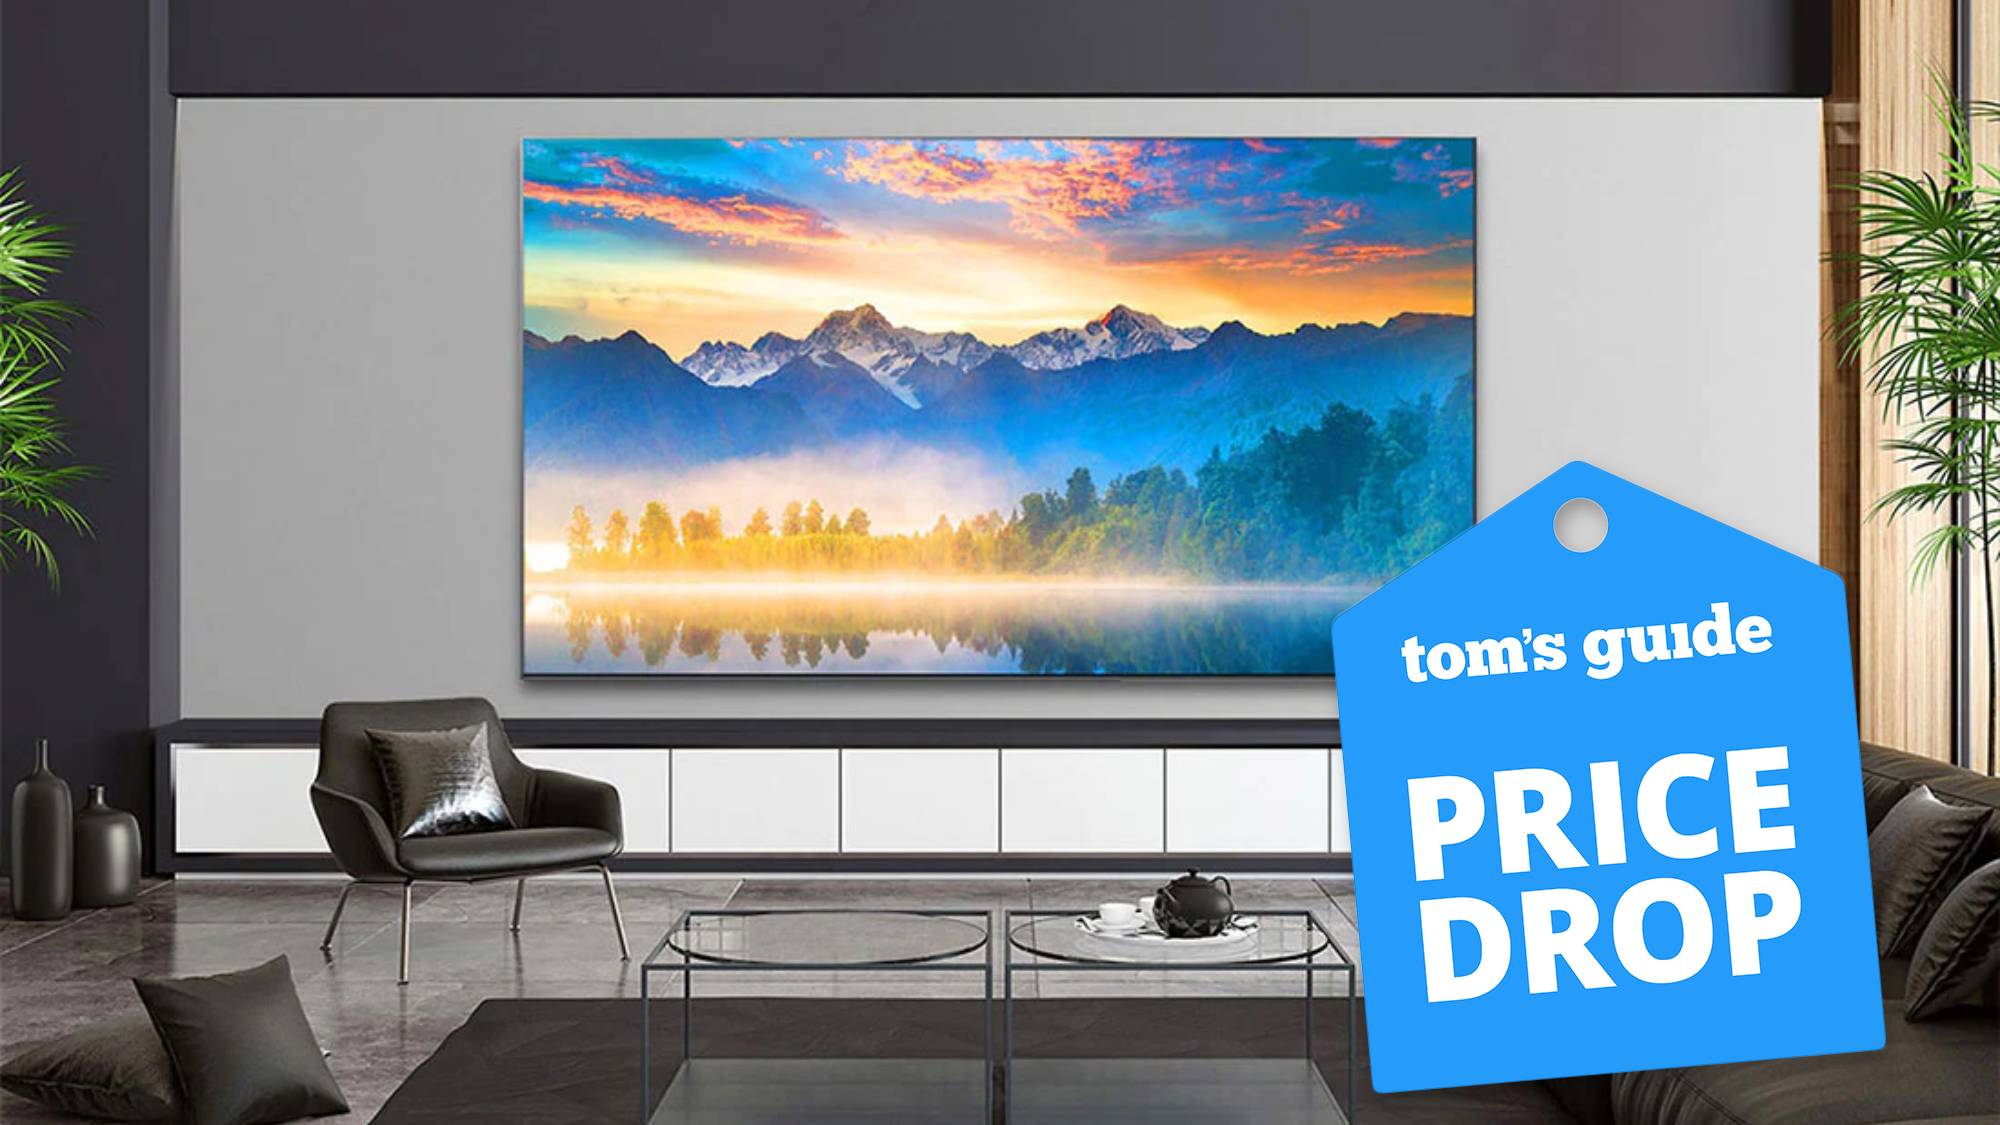 LG Class NanoCell 99 Series LED 8K TV with Tom's Guide deals tag